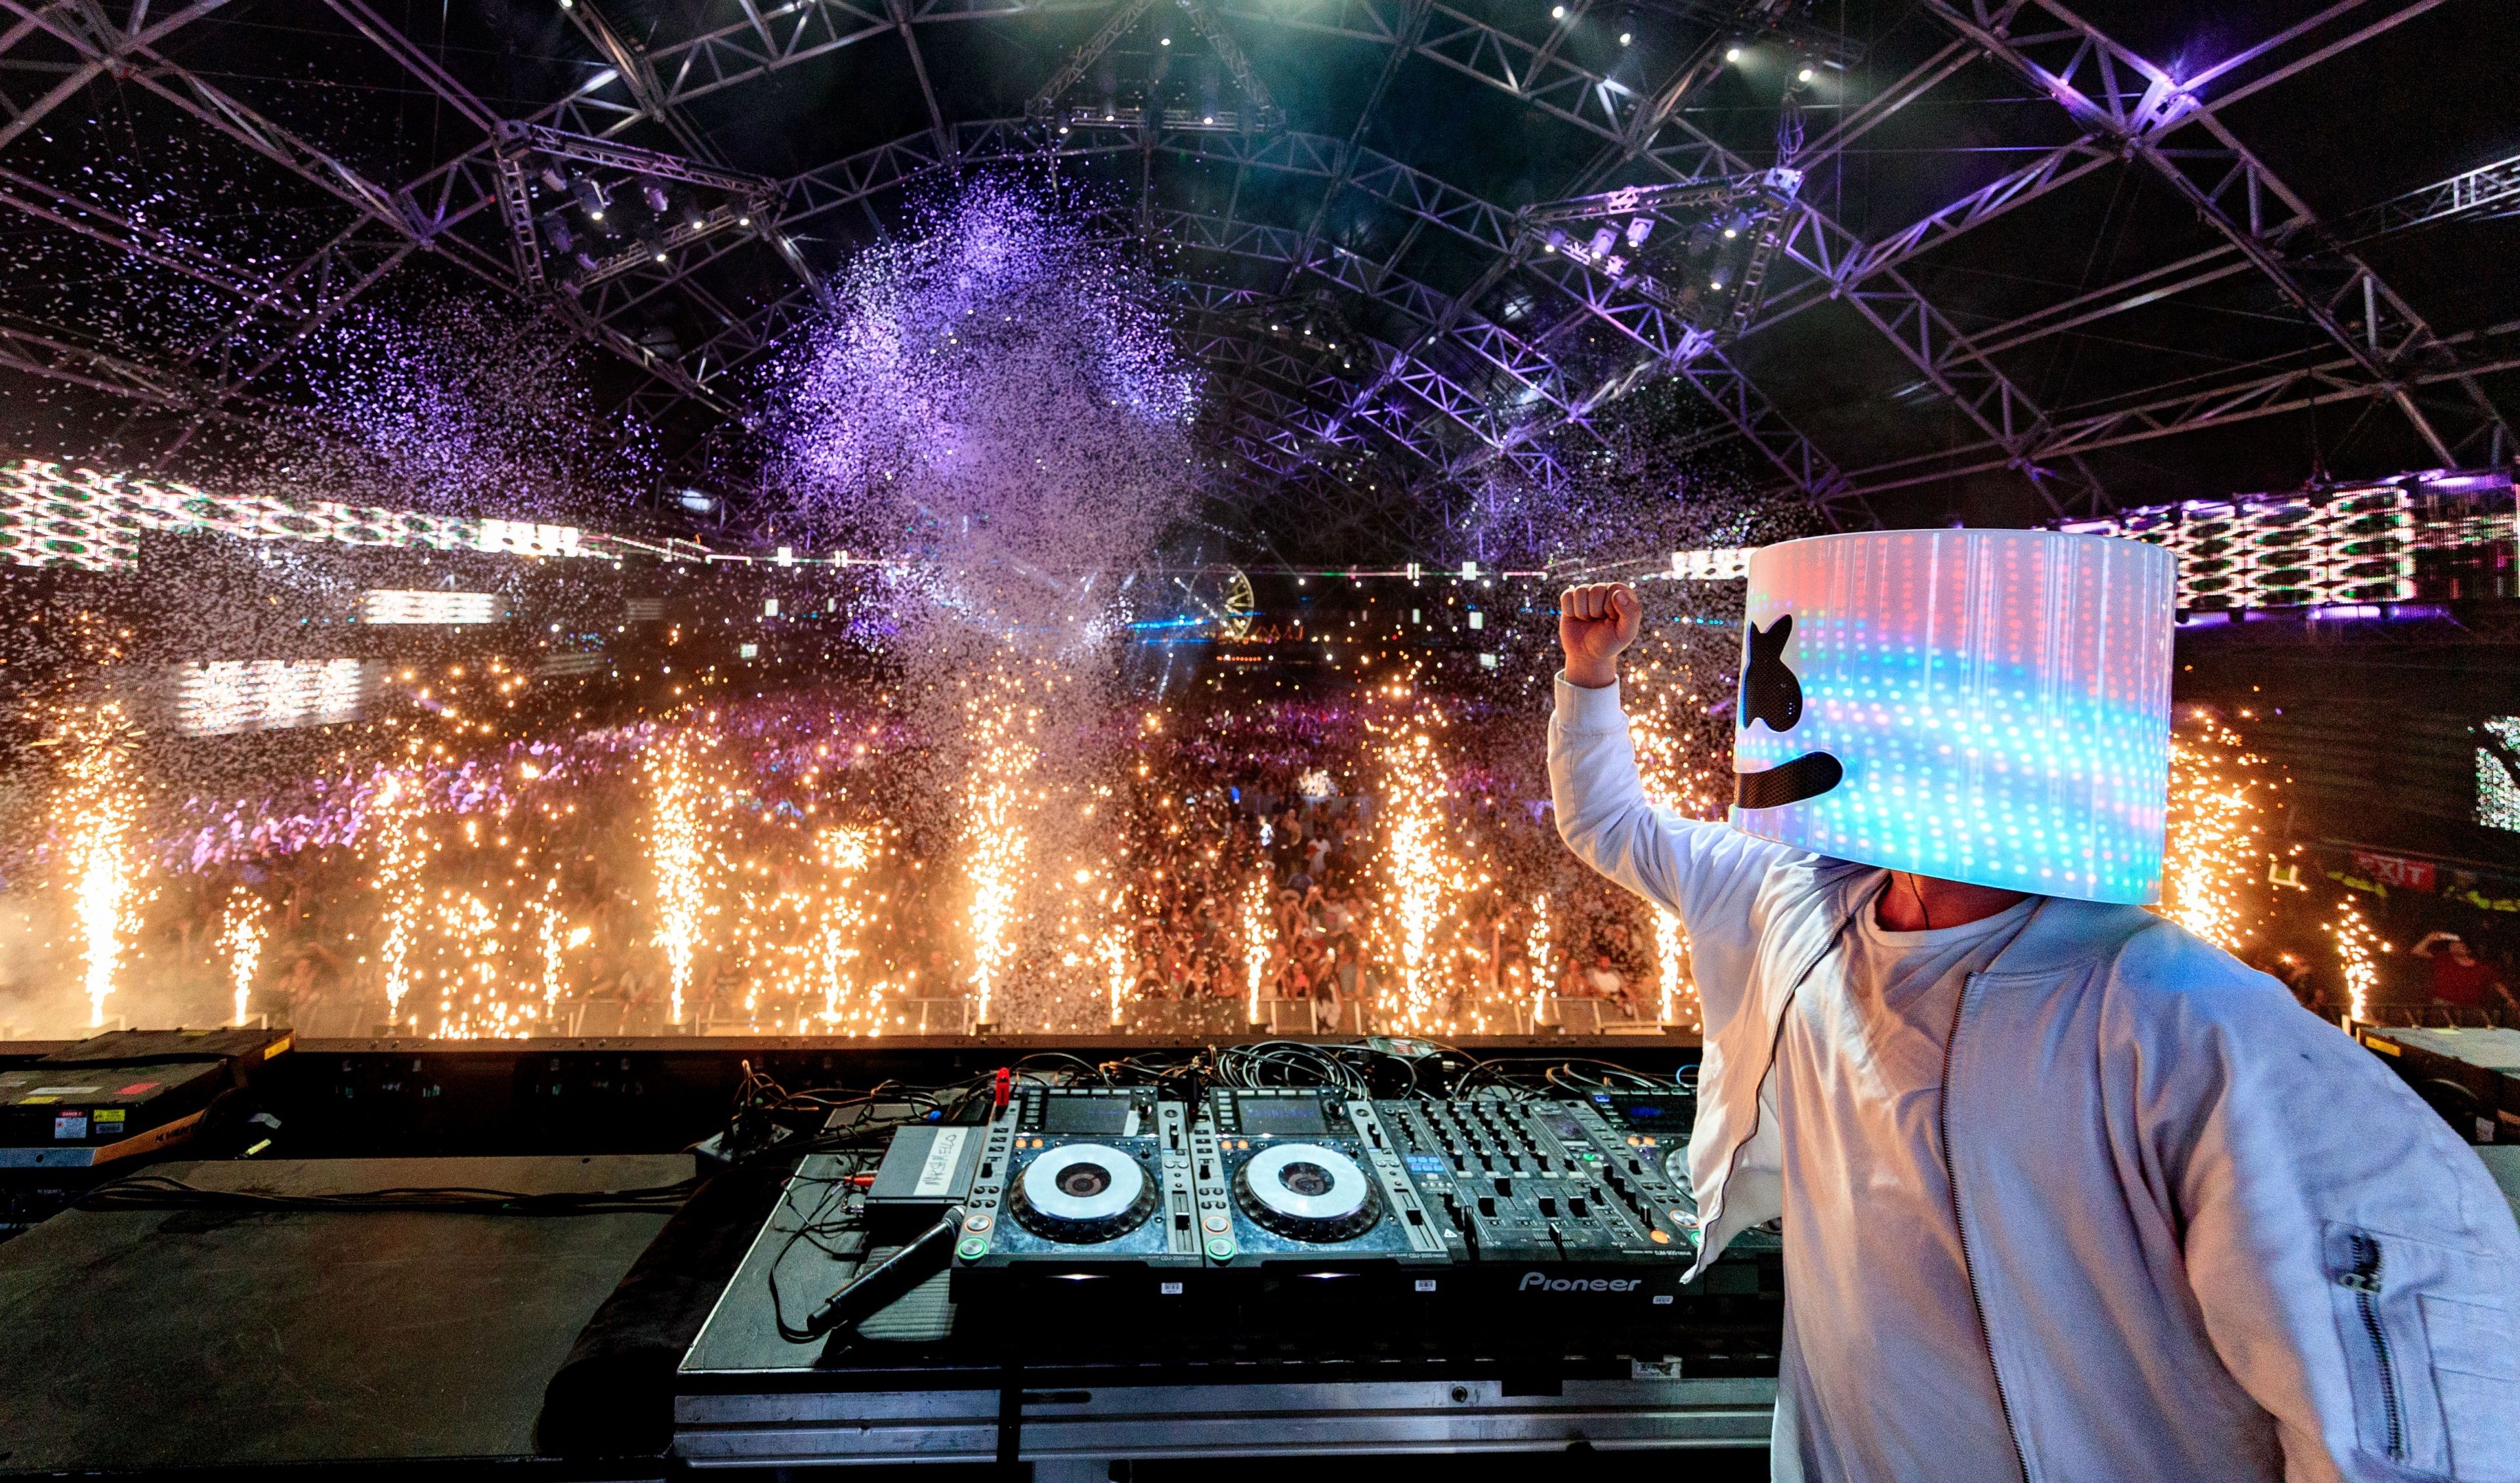 marshmello 4k download background for pc. Music festival photography, Live concert, Concert